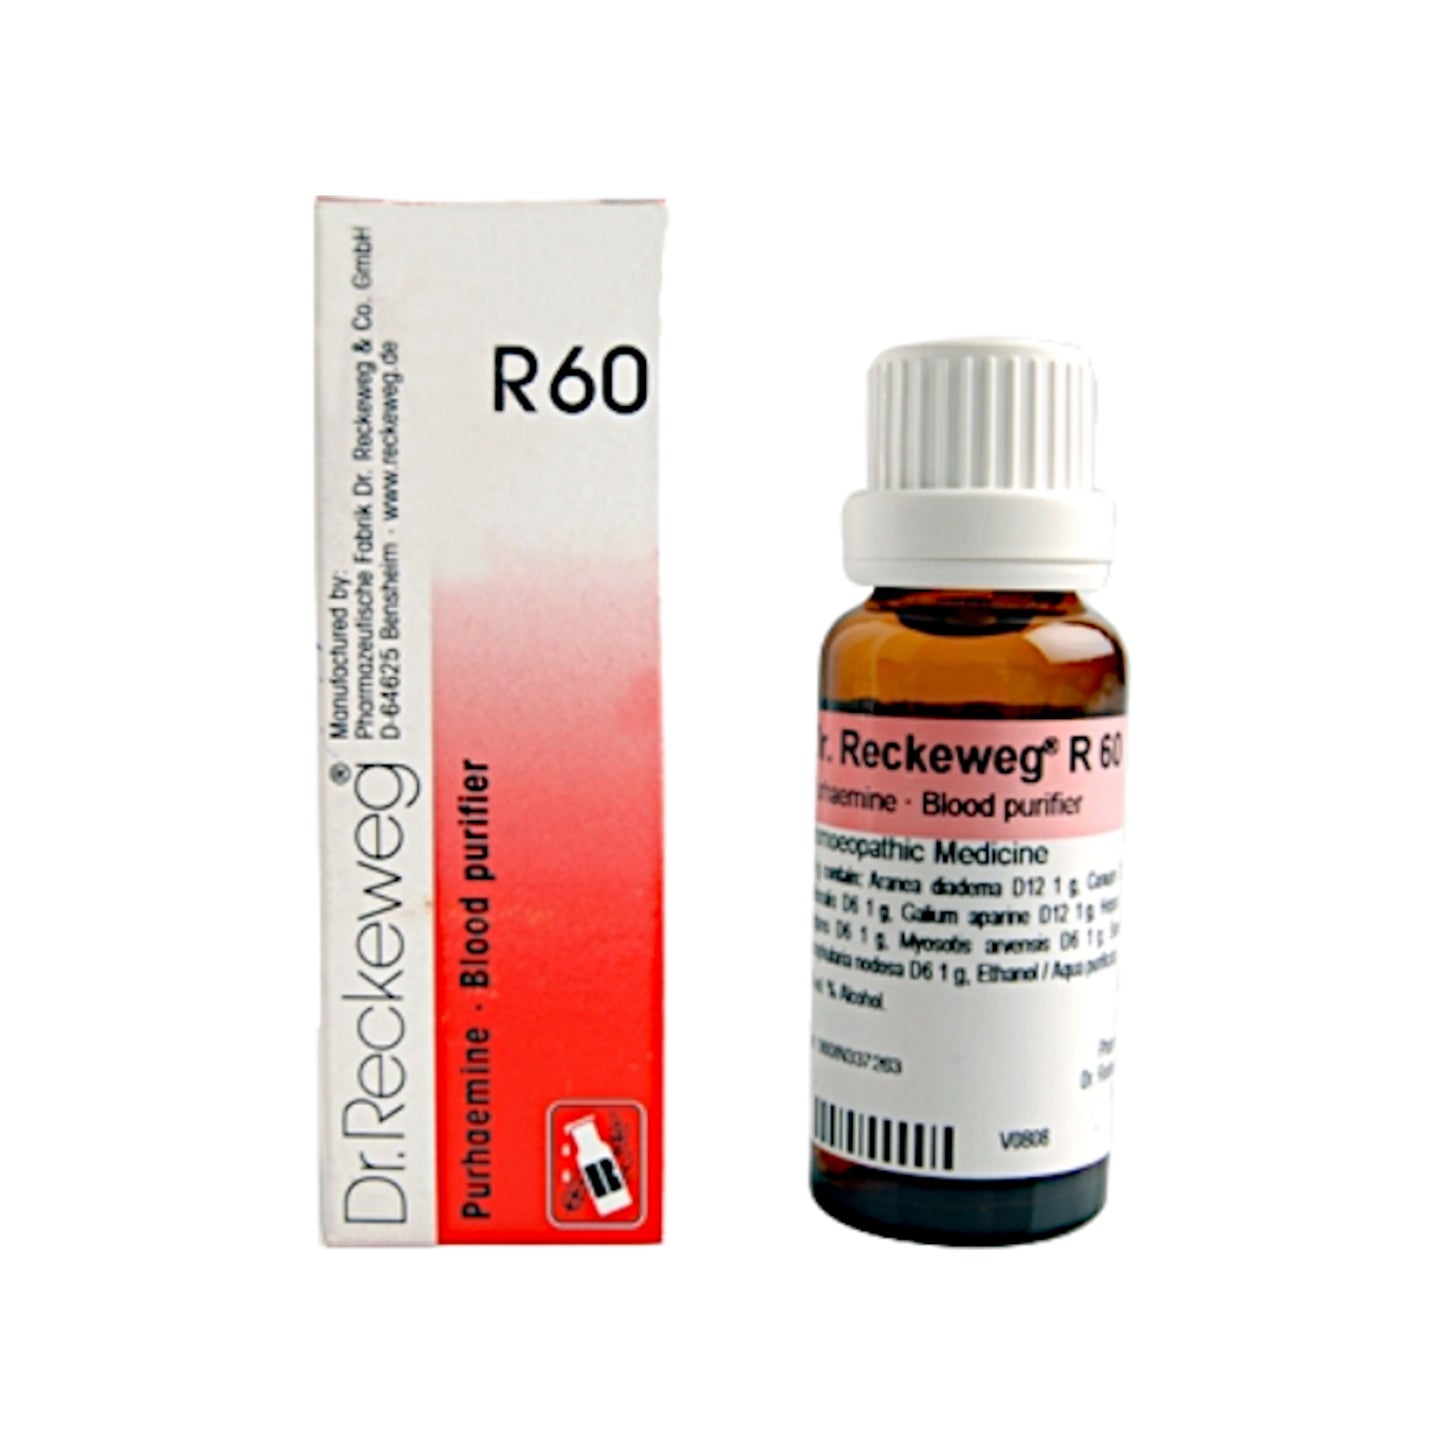 Image: DR. RECKEWEG R60 - Blood Purifier 22 ml - Promotes blood purification, skin health, and overall well-being.